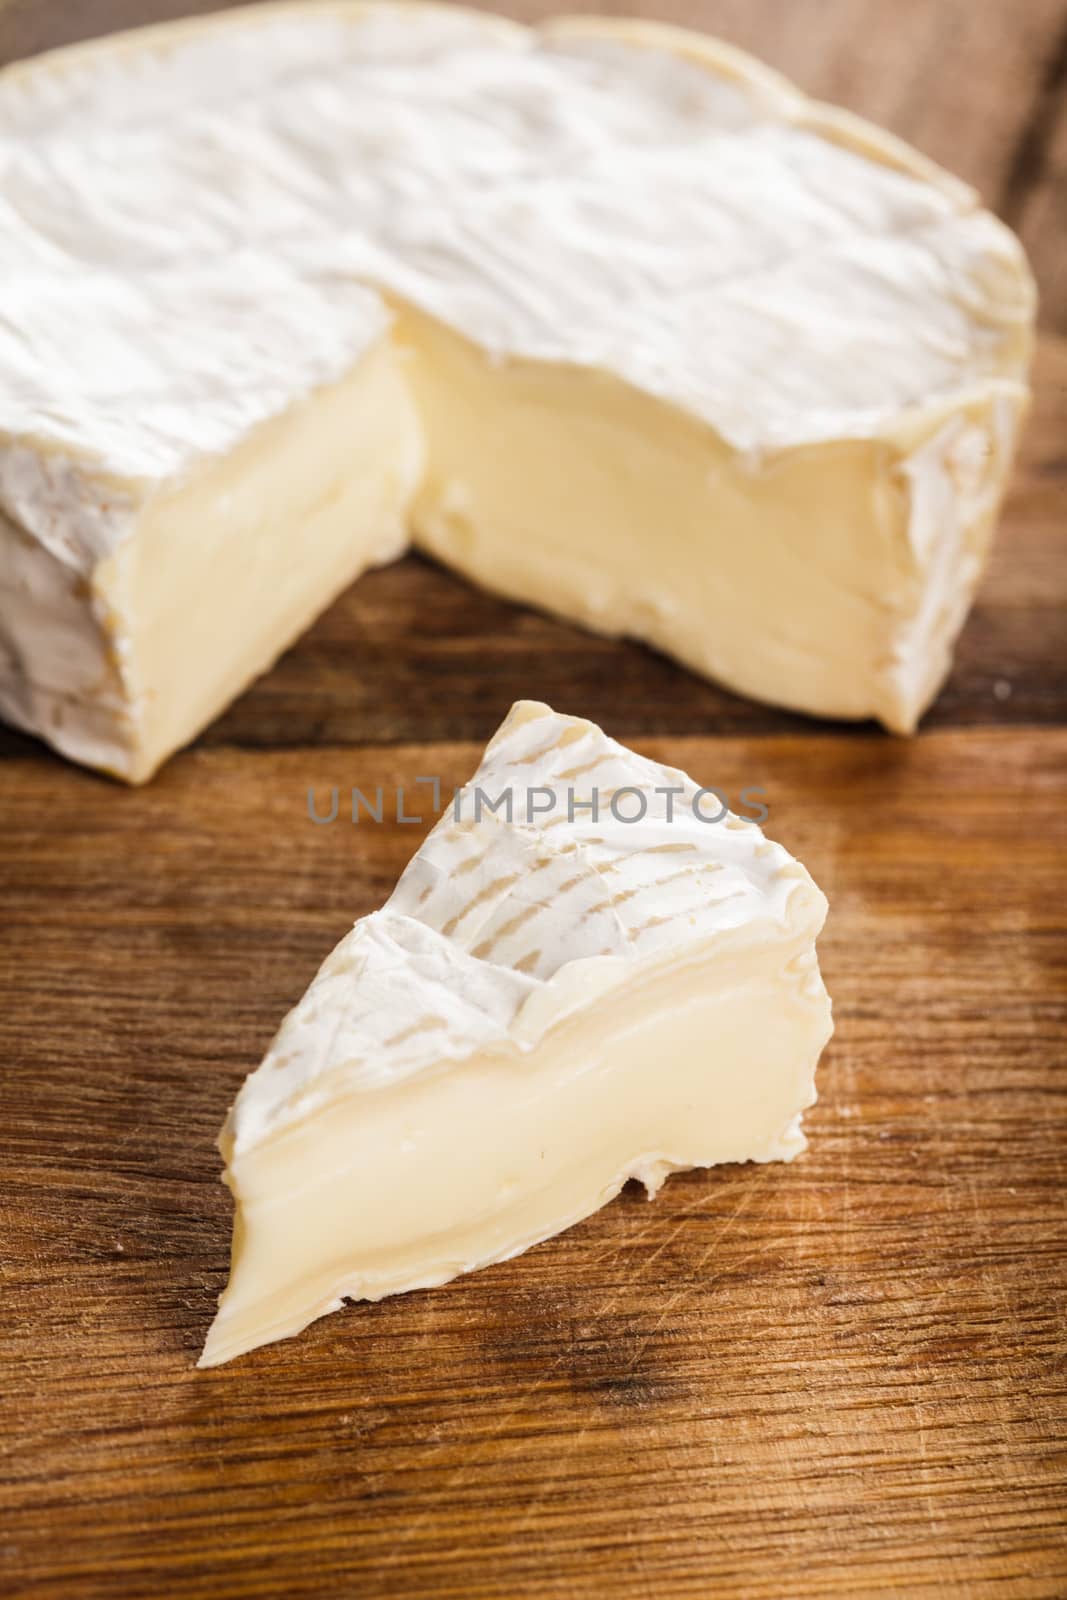 camembert cheese slice over the wooden board